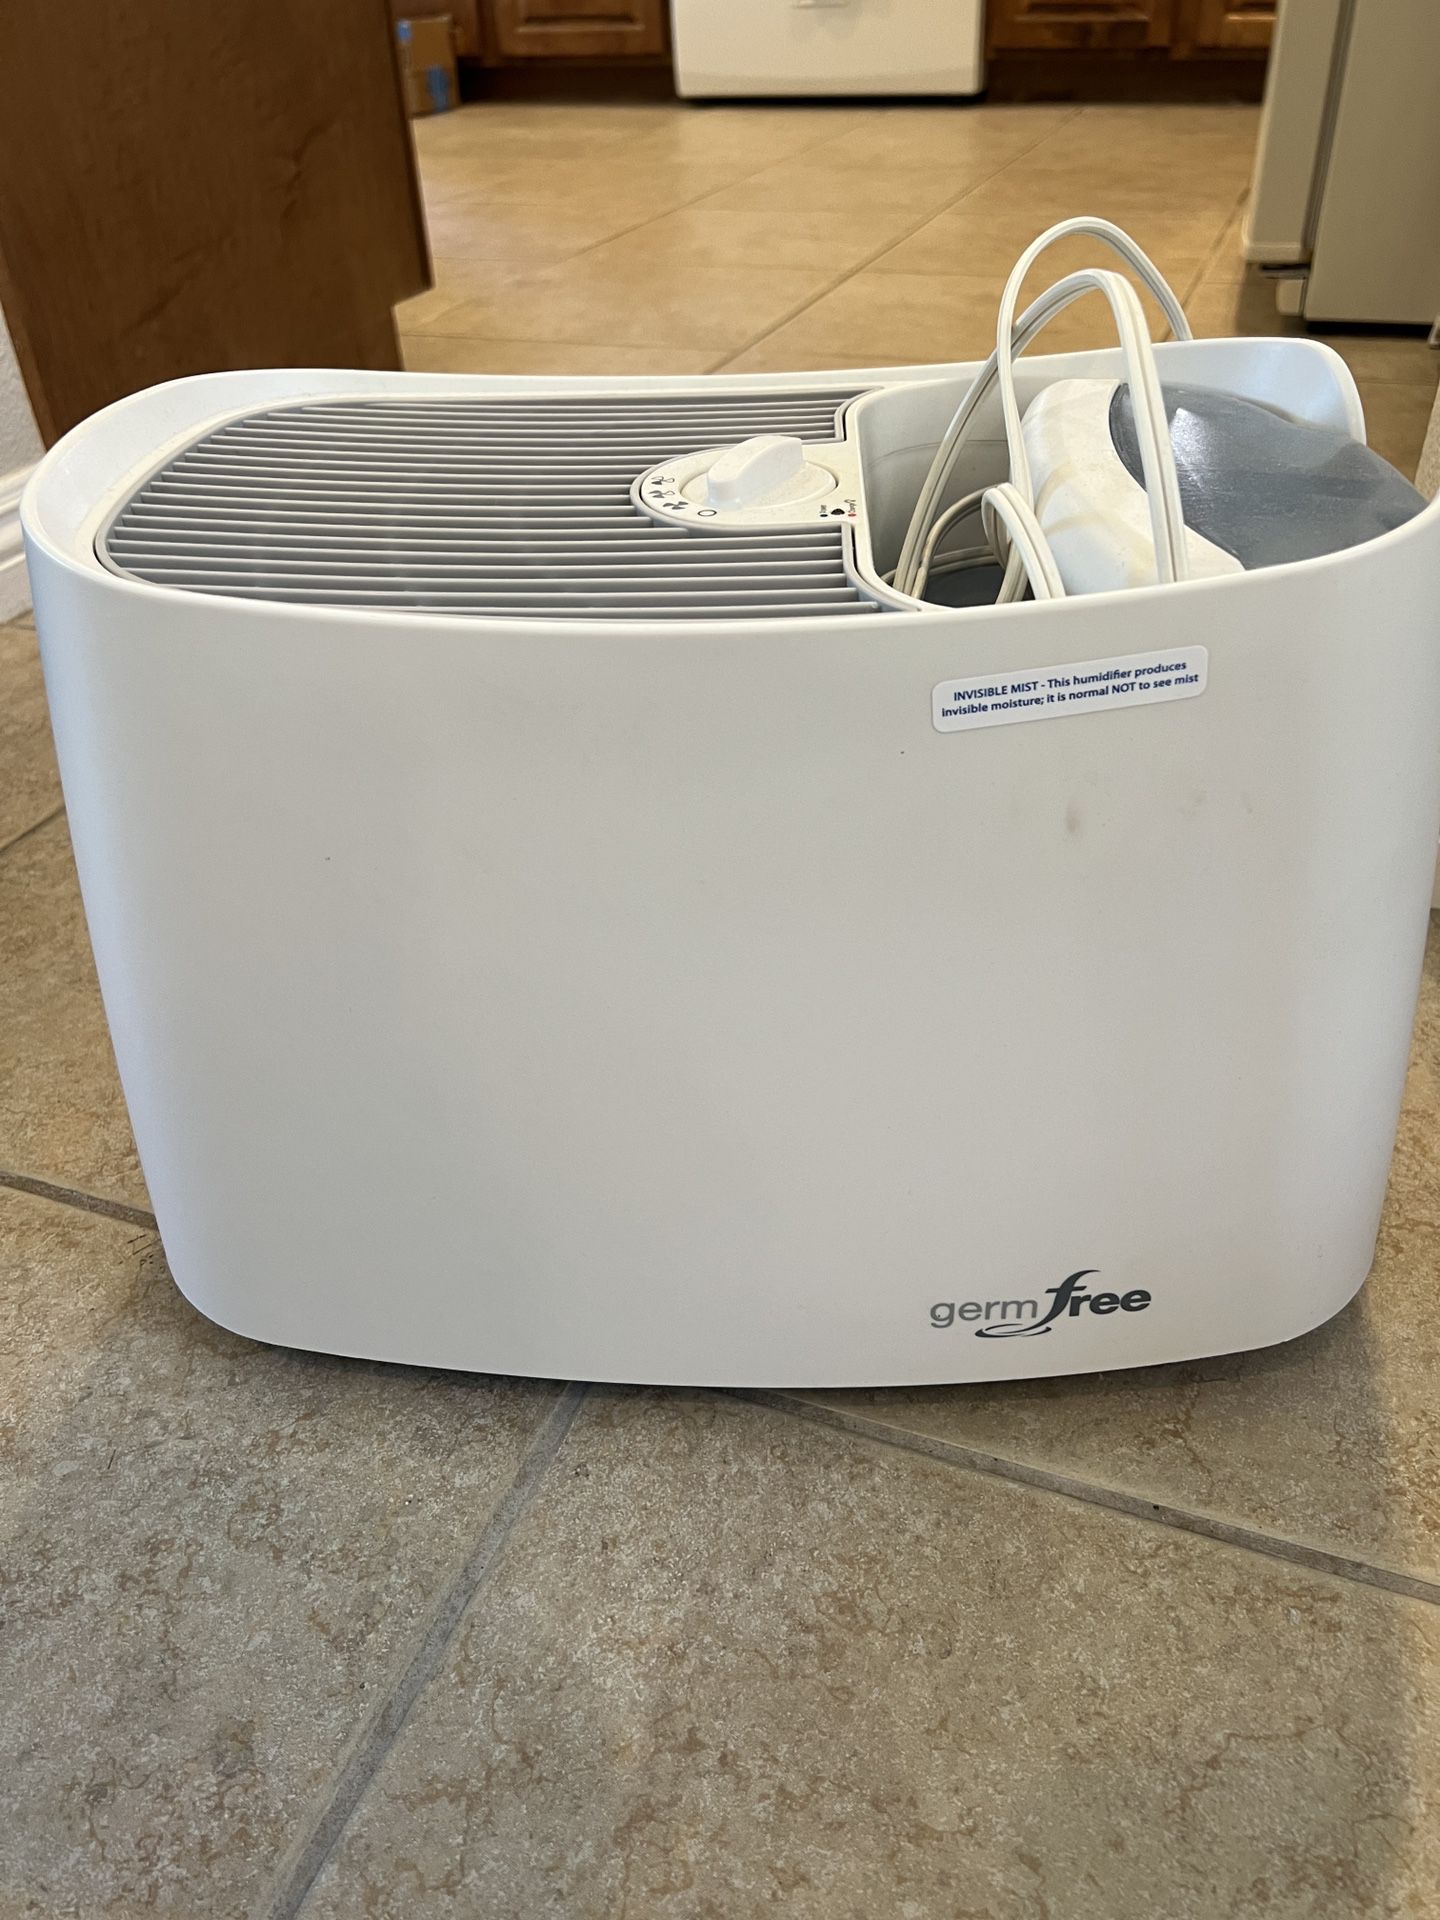 Honeywell Germ Free Humidifiers Selling 3.  Great Condition $25 Each Or All Three For $60